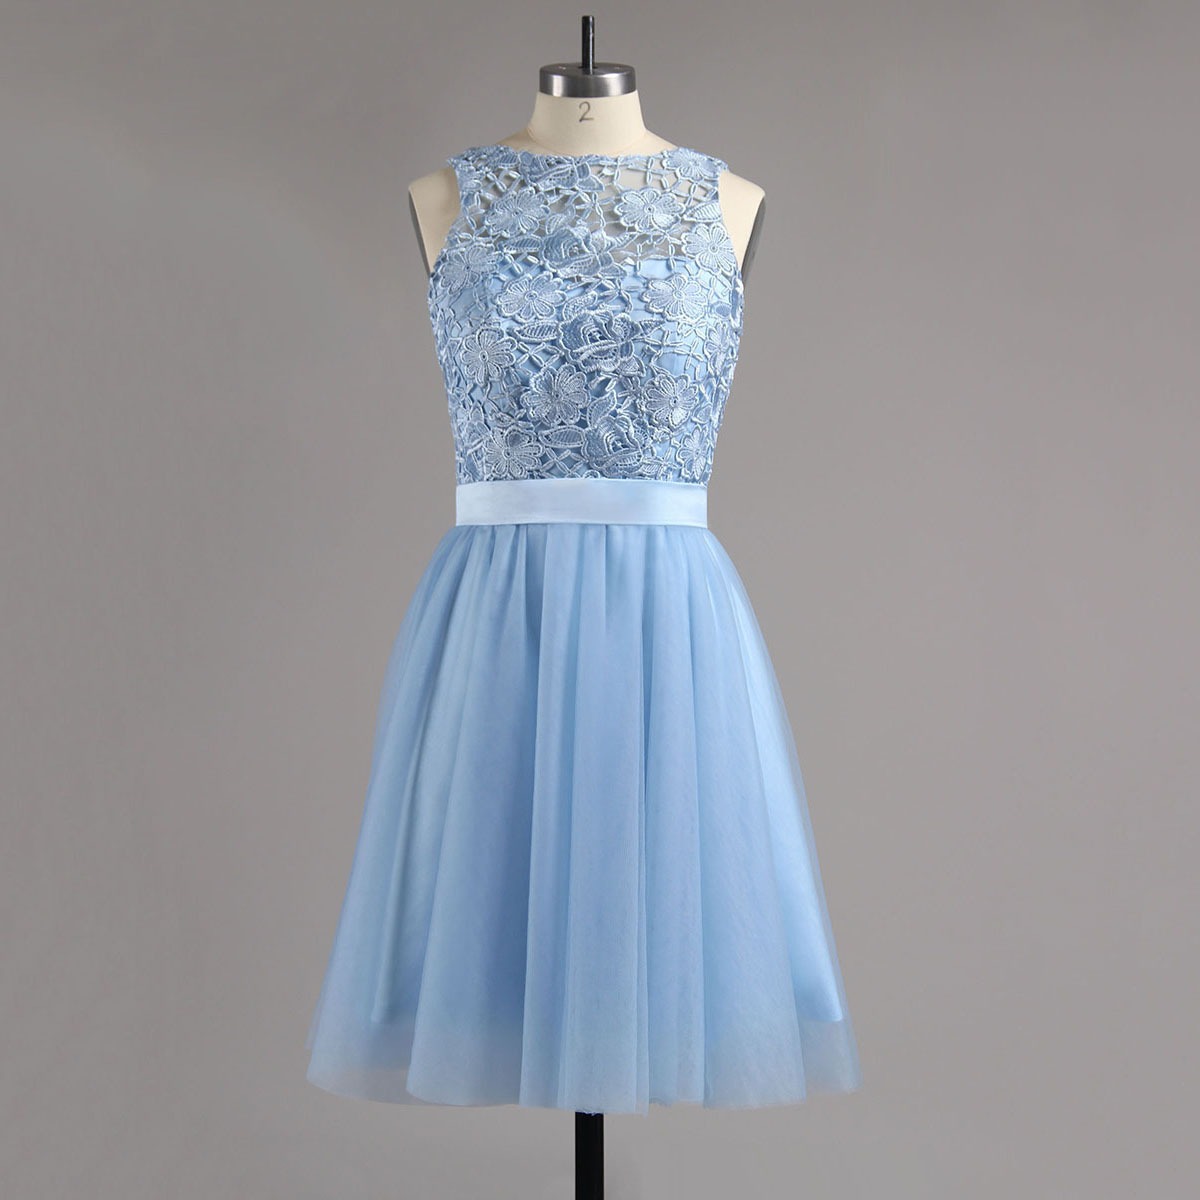 Ice Blue Homecoming Dress With Sash, Tulle Homecoming Dress With Lace Appliques, Short Open Back Homecoming Dress